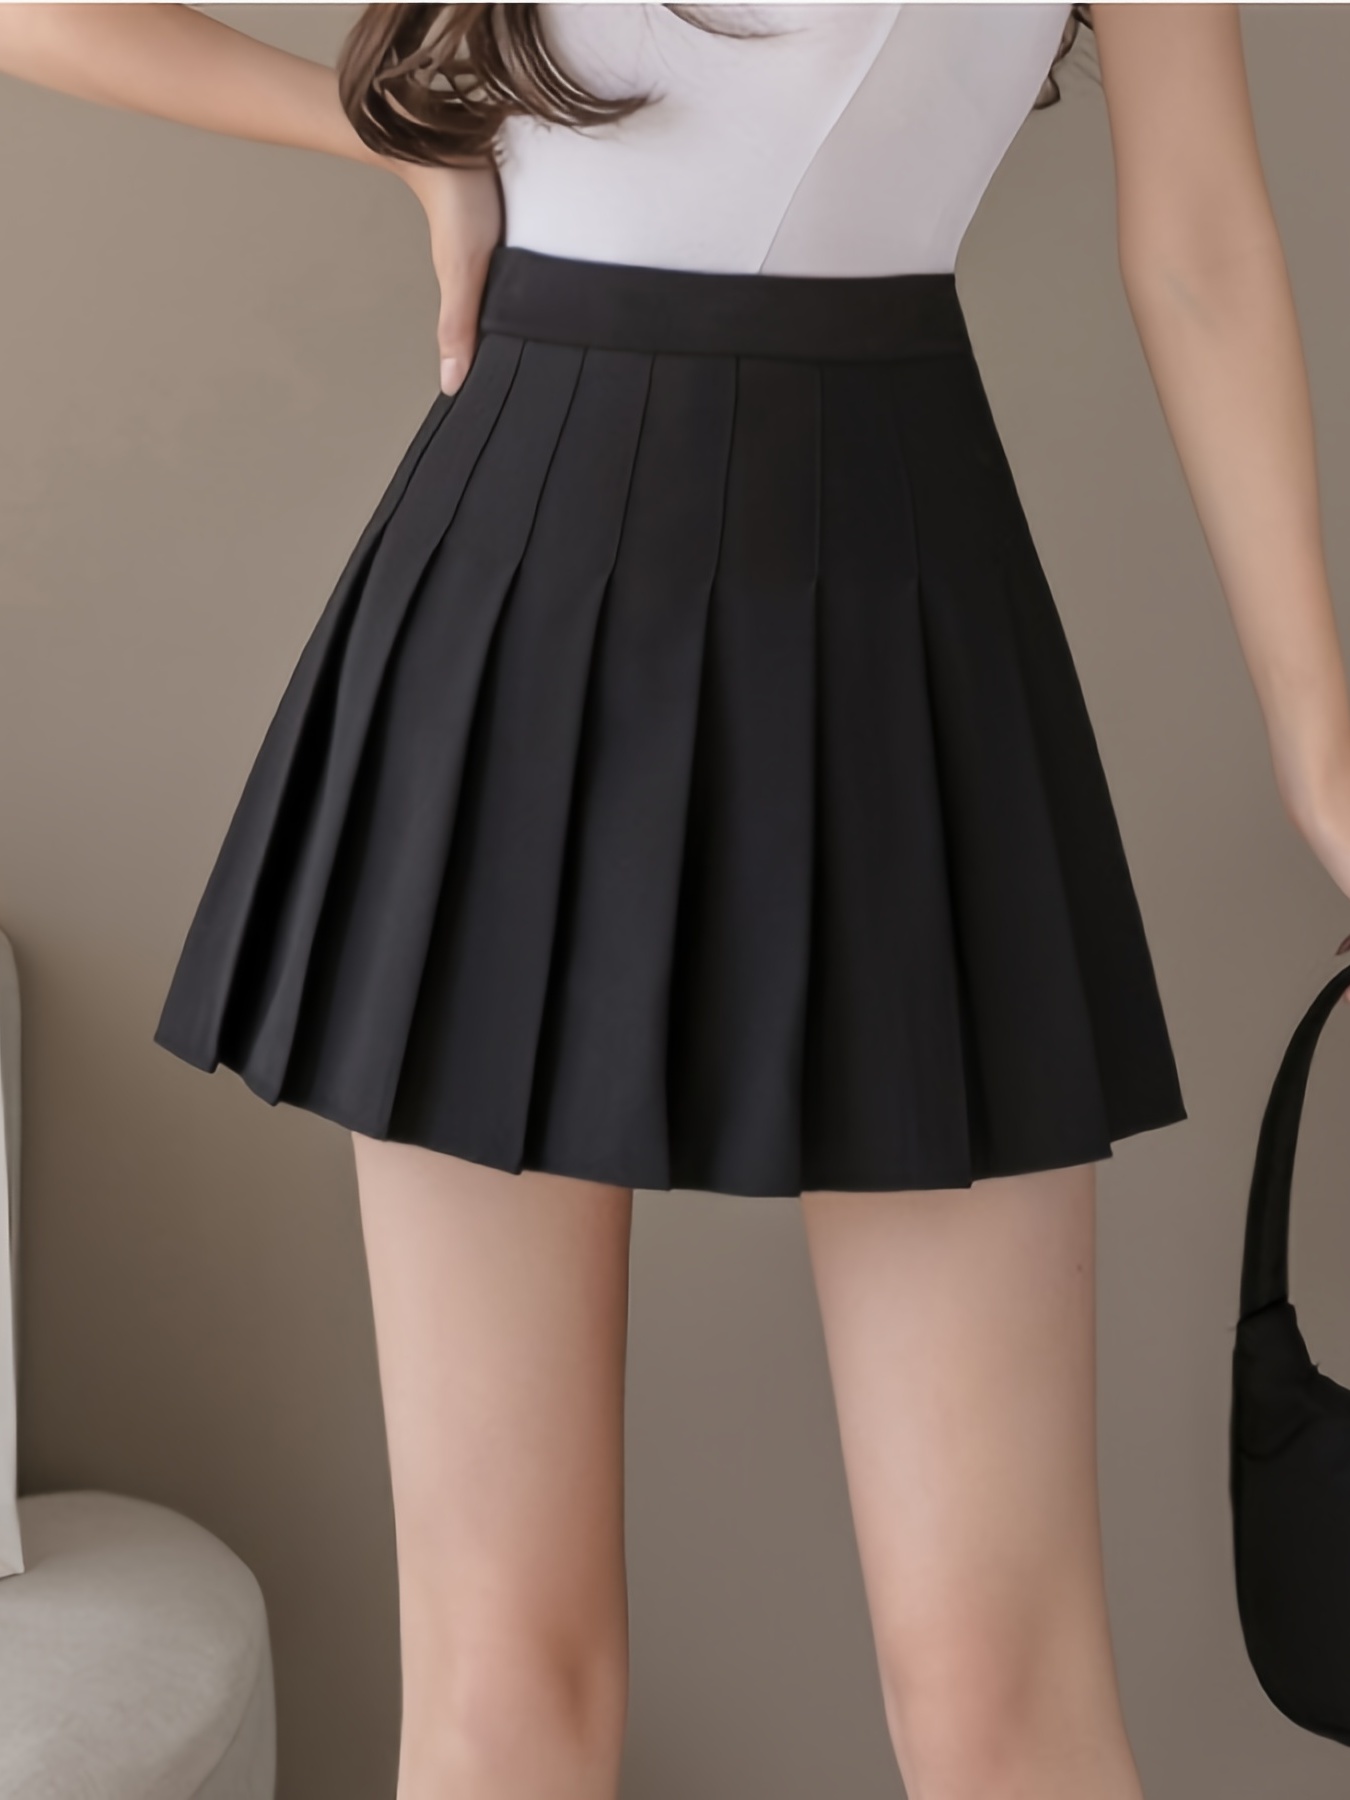 Black Pleated Skirts for Women